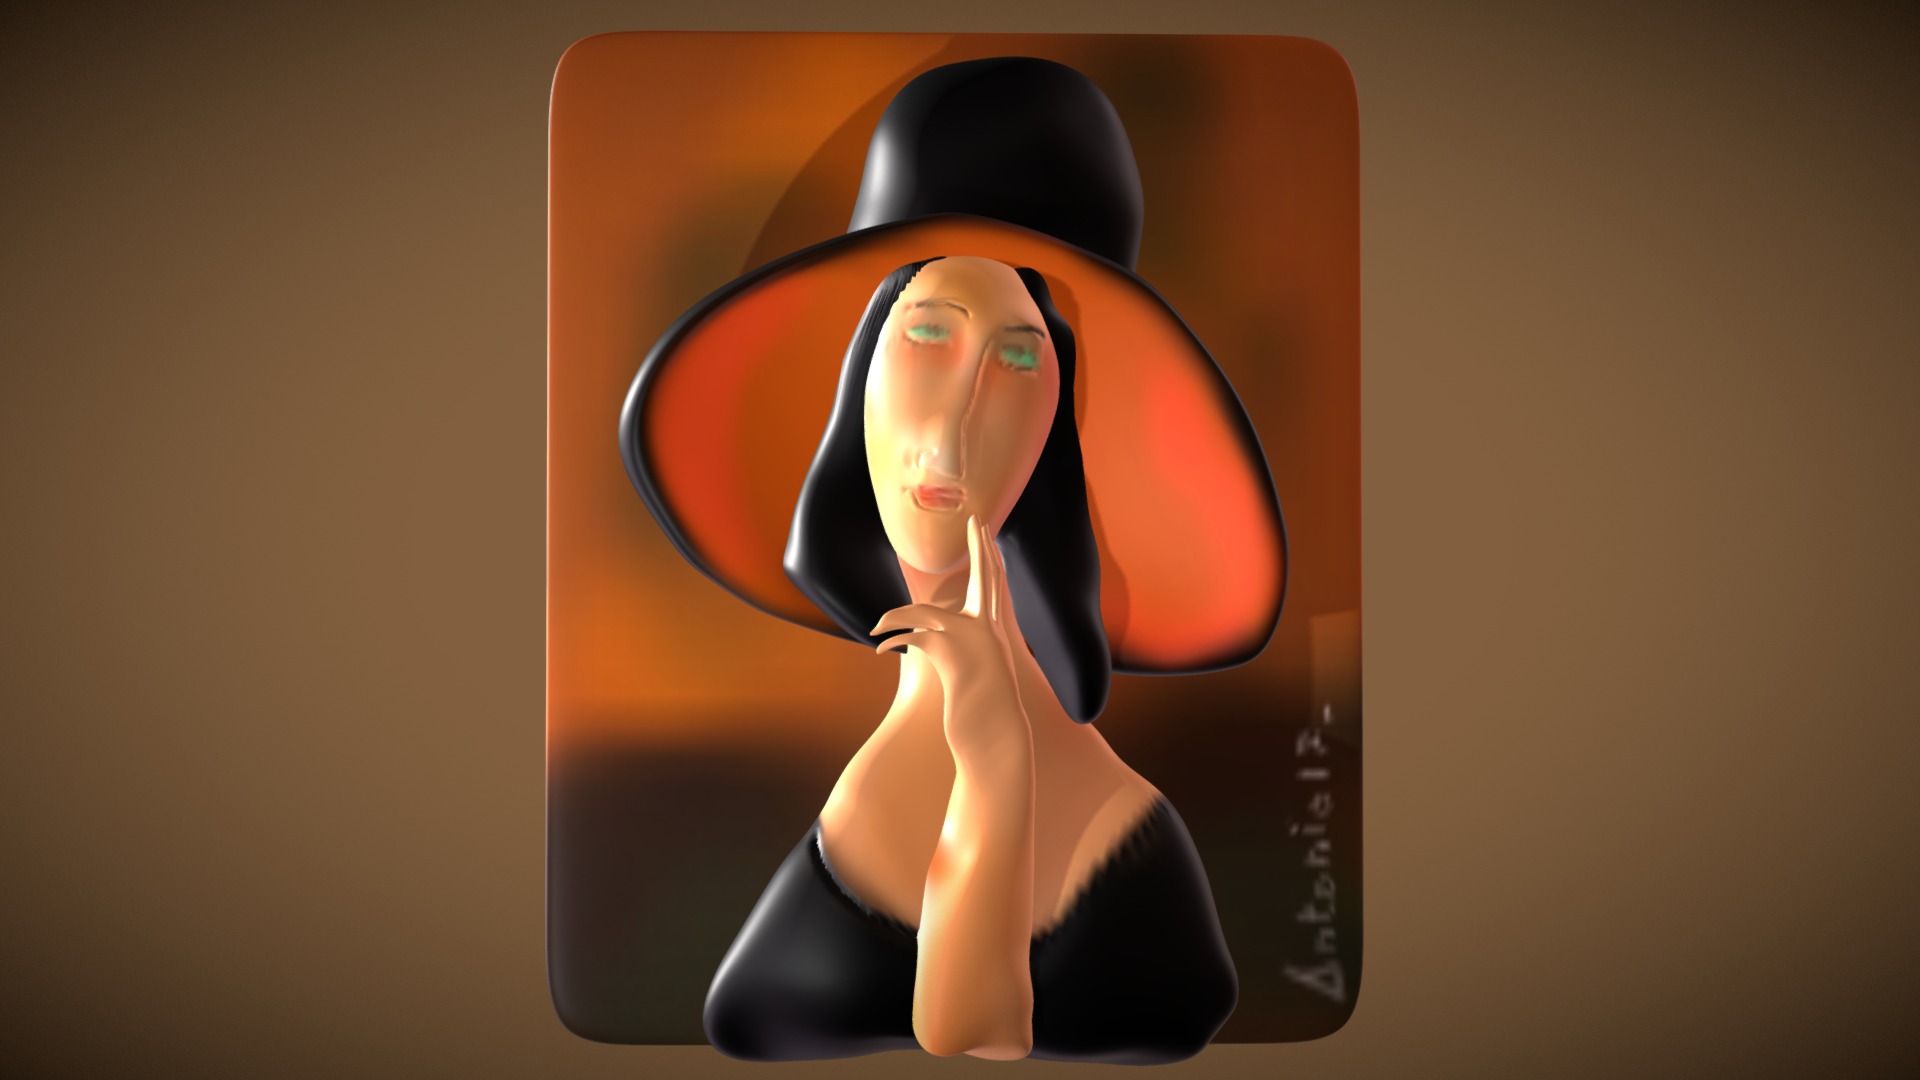 3D model Modigliani –  Jeanne Hebuterne CON CAPPELLO - This is a 3D model of the Modigliani -  Jeanne Hebuterne CON CAPPELLO. The 3D model is about a woman's head in a circle with a red circle around her head.